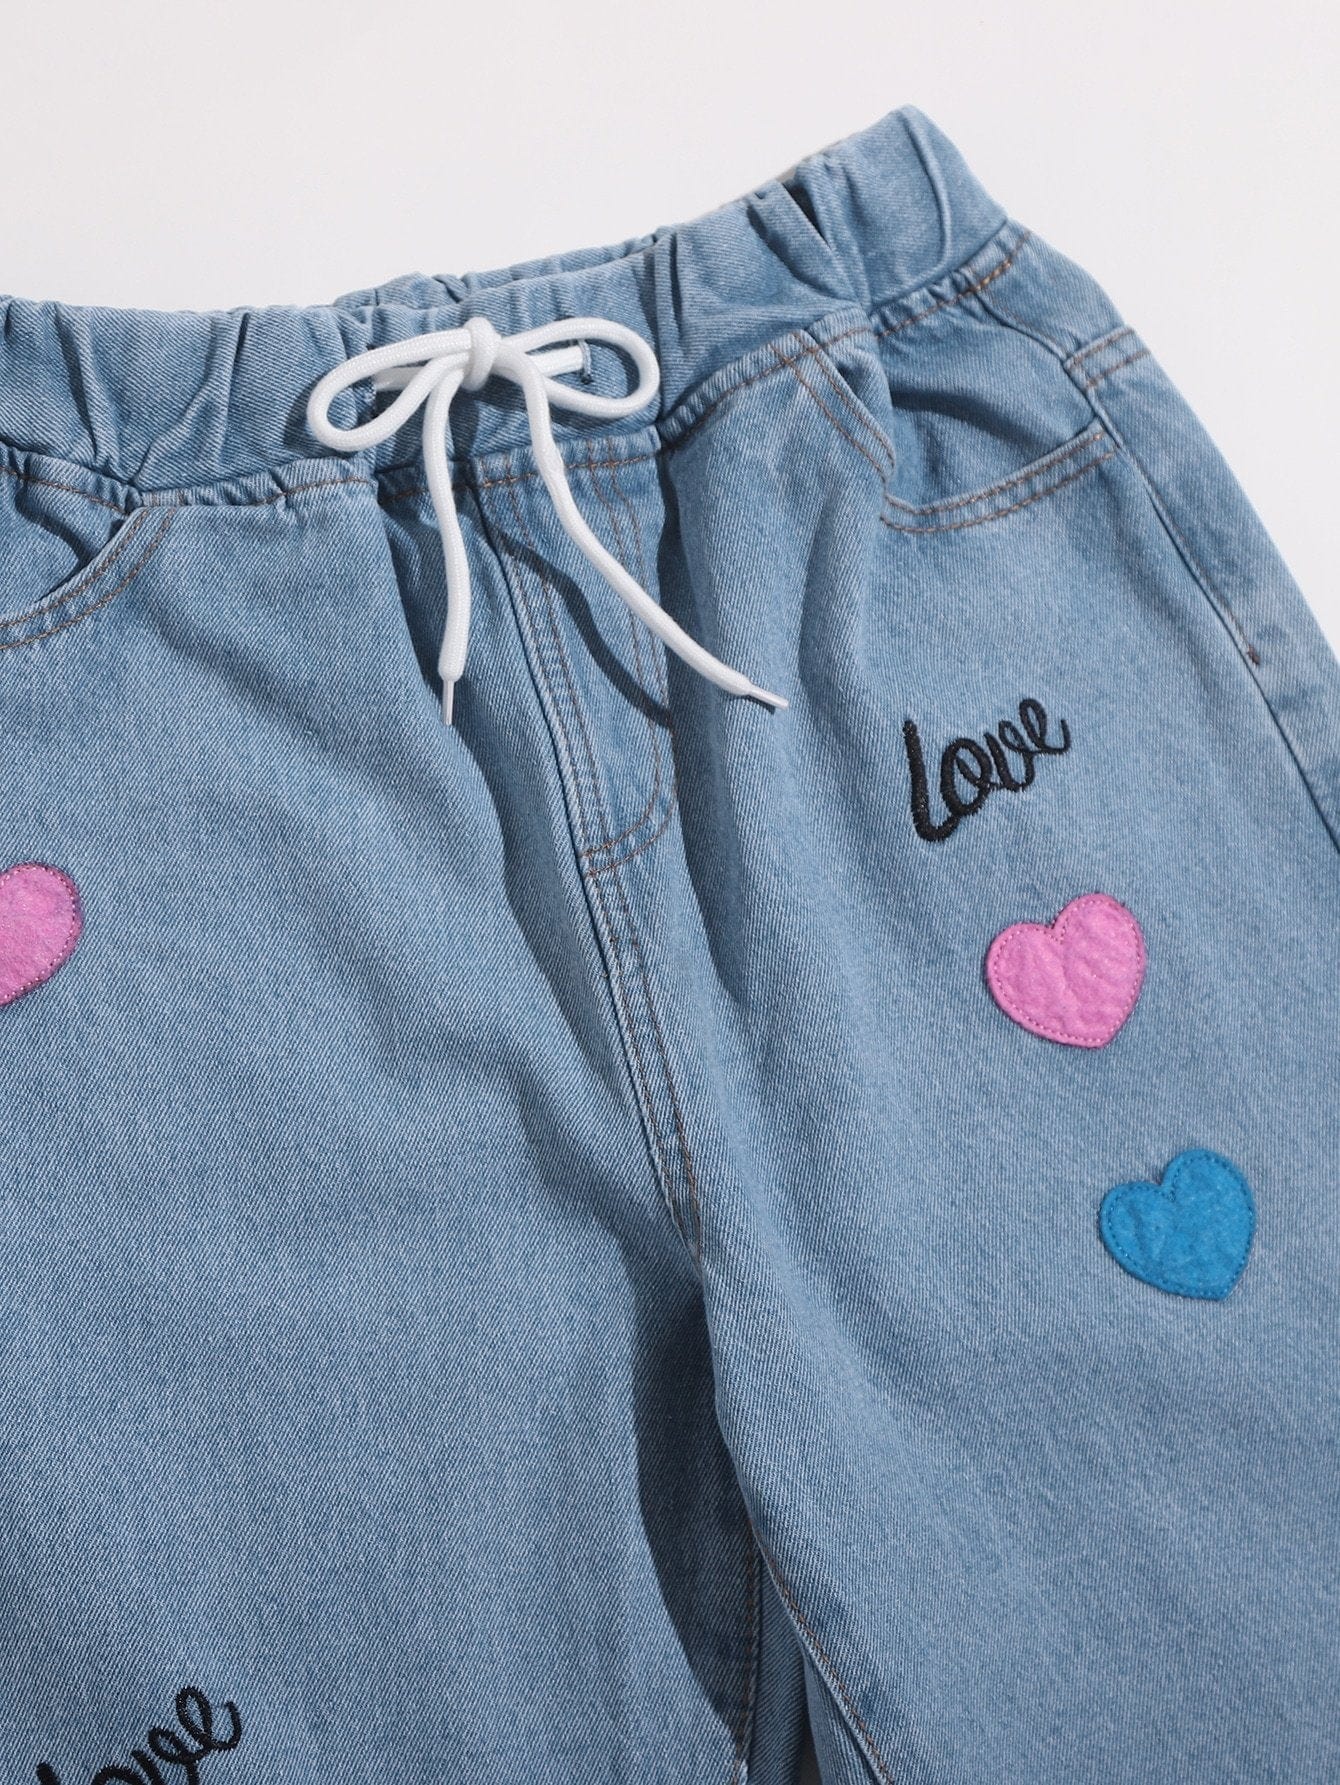 Heart Patched Drawstring Jeans